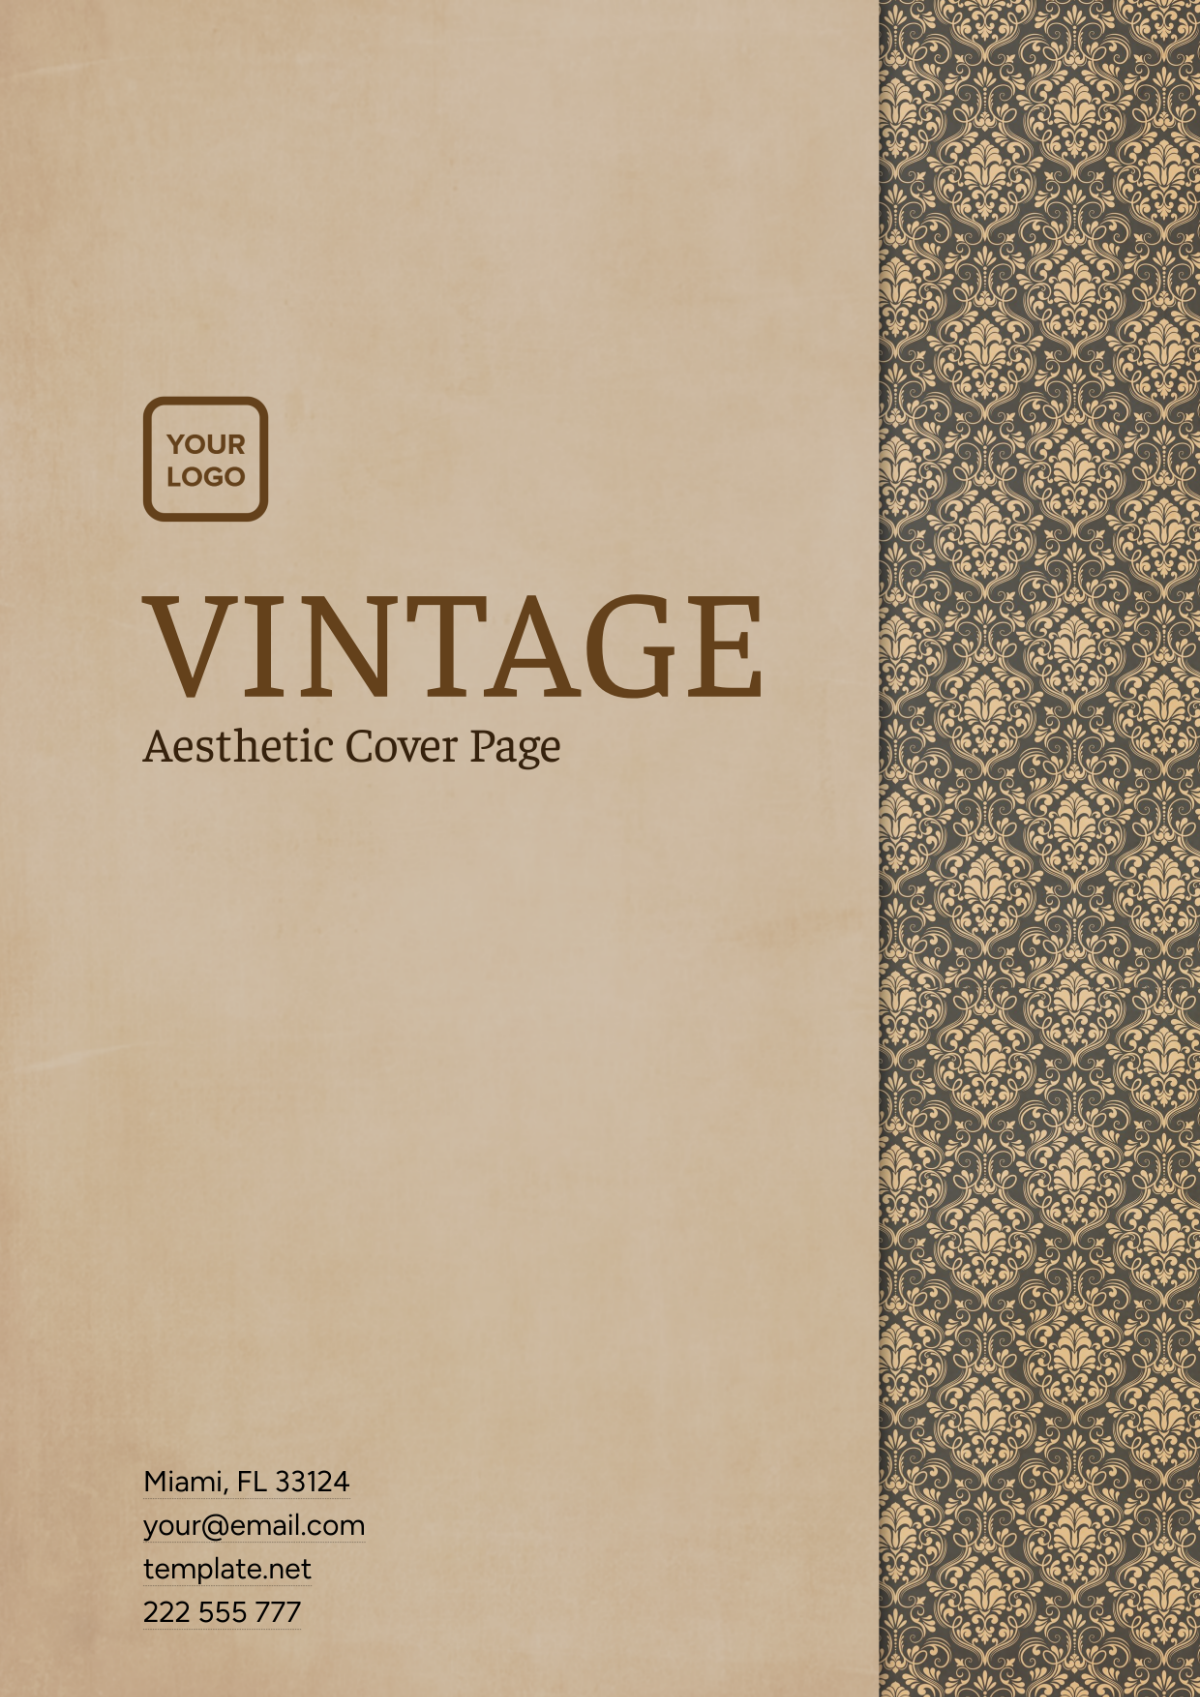 Vintage Aesthetic Cover Page Template